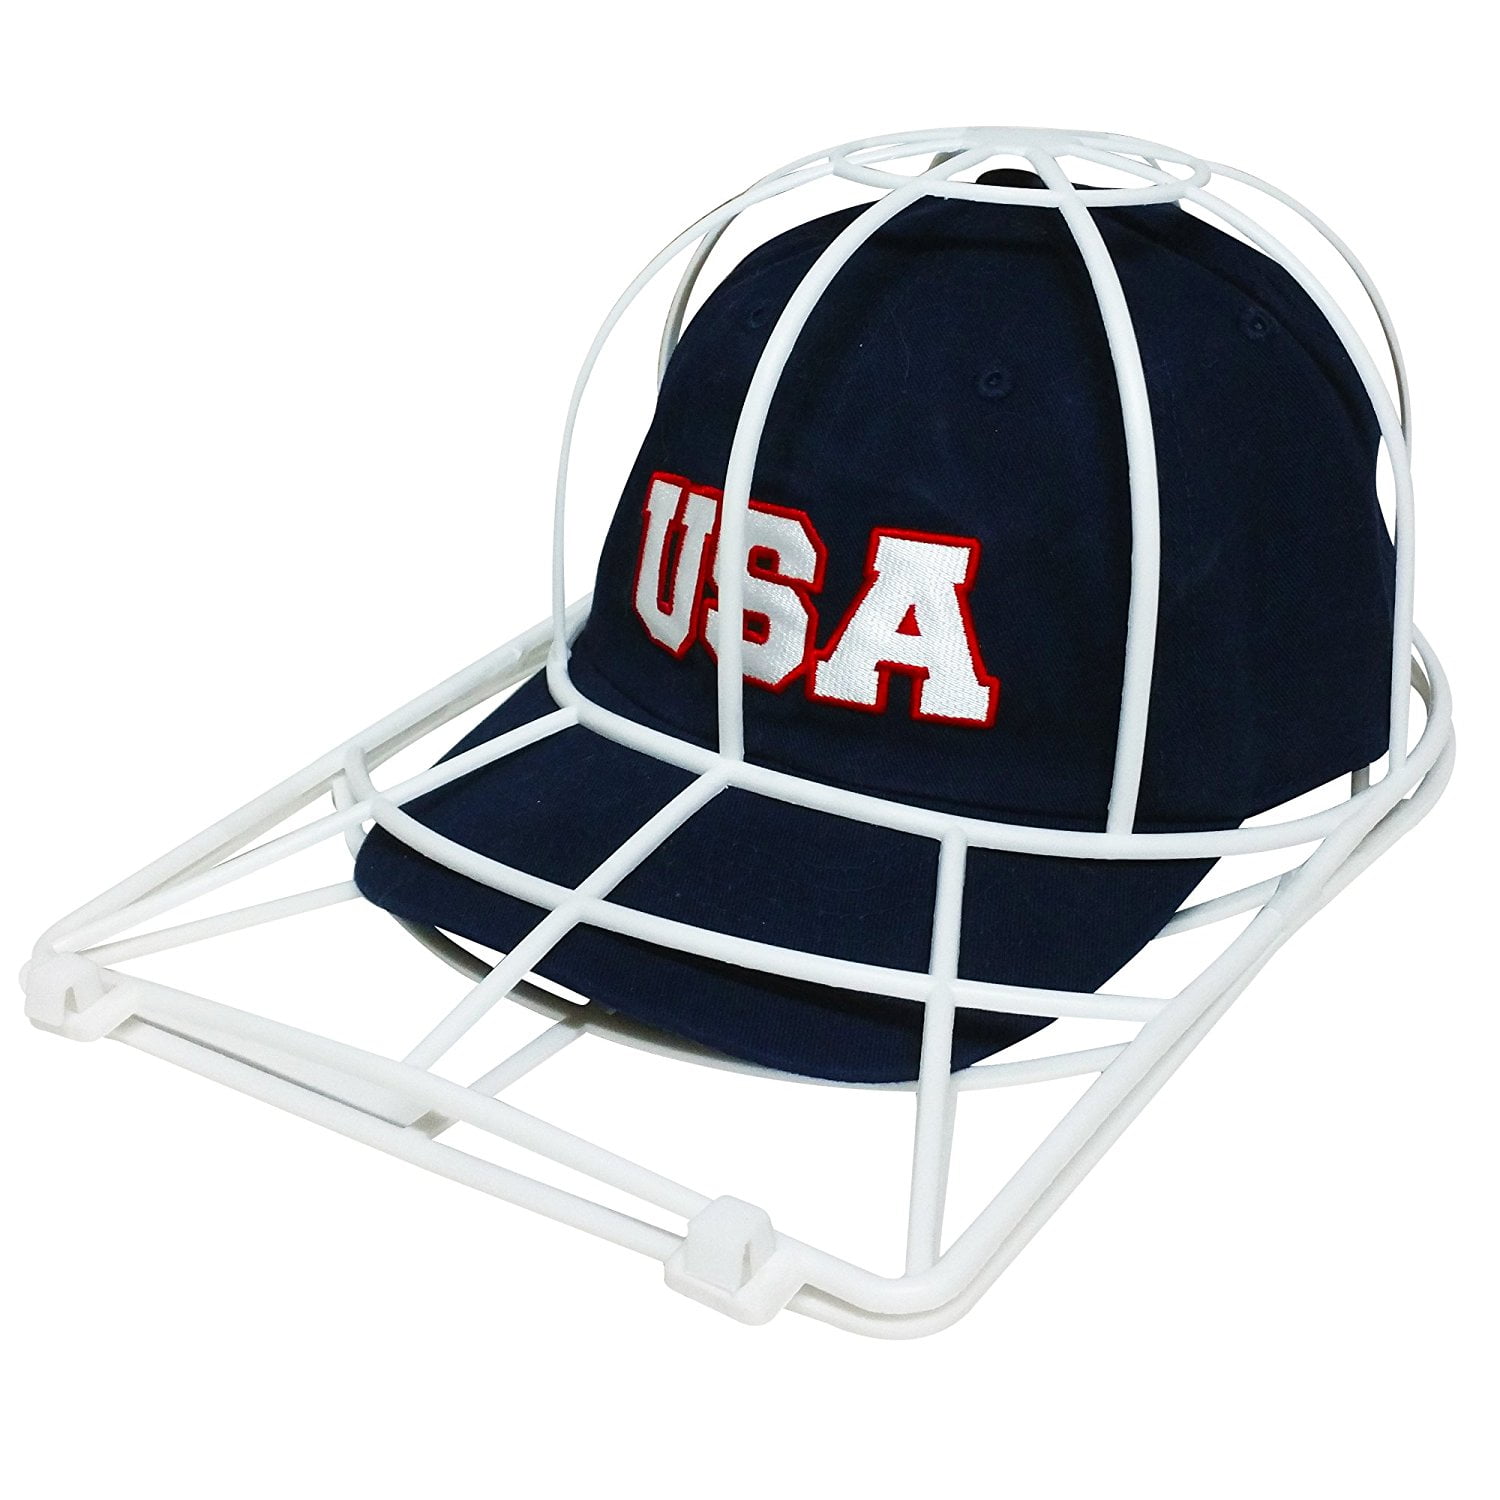 Washer Baseball Hat Cleaner Cleaning Protector Cap Washing Frame Cage Hold L 